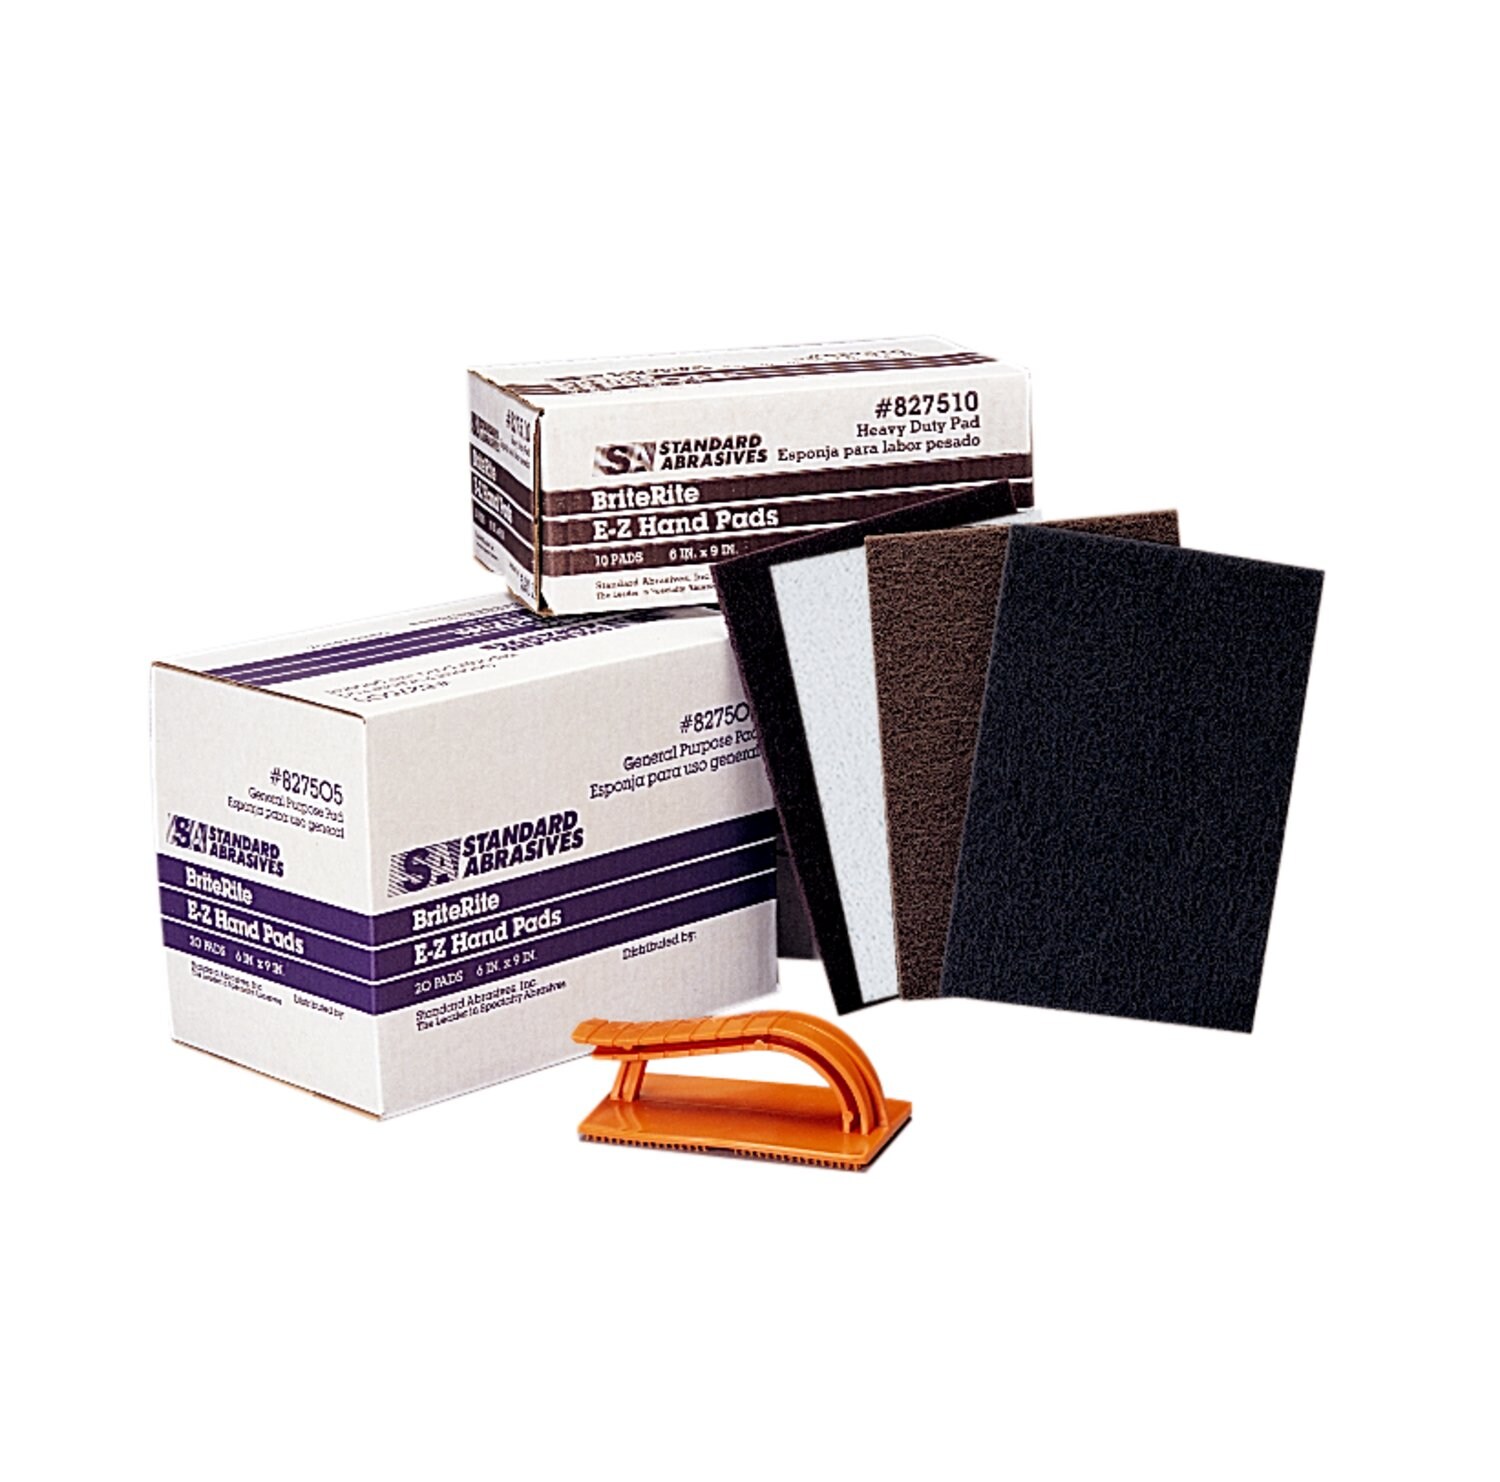 7010310293 - Standard Abrasives Buff and Blend HP Power Pad, 827620, 6 in x 9 in, A
VFN, 50 ea/Case